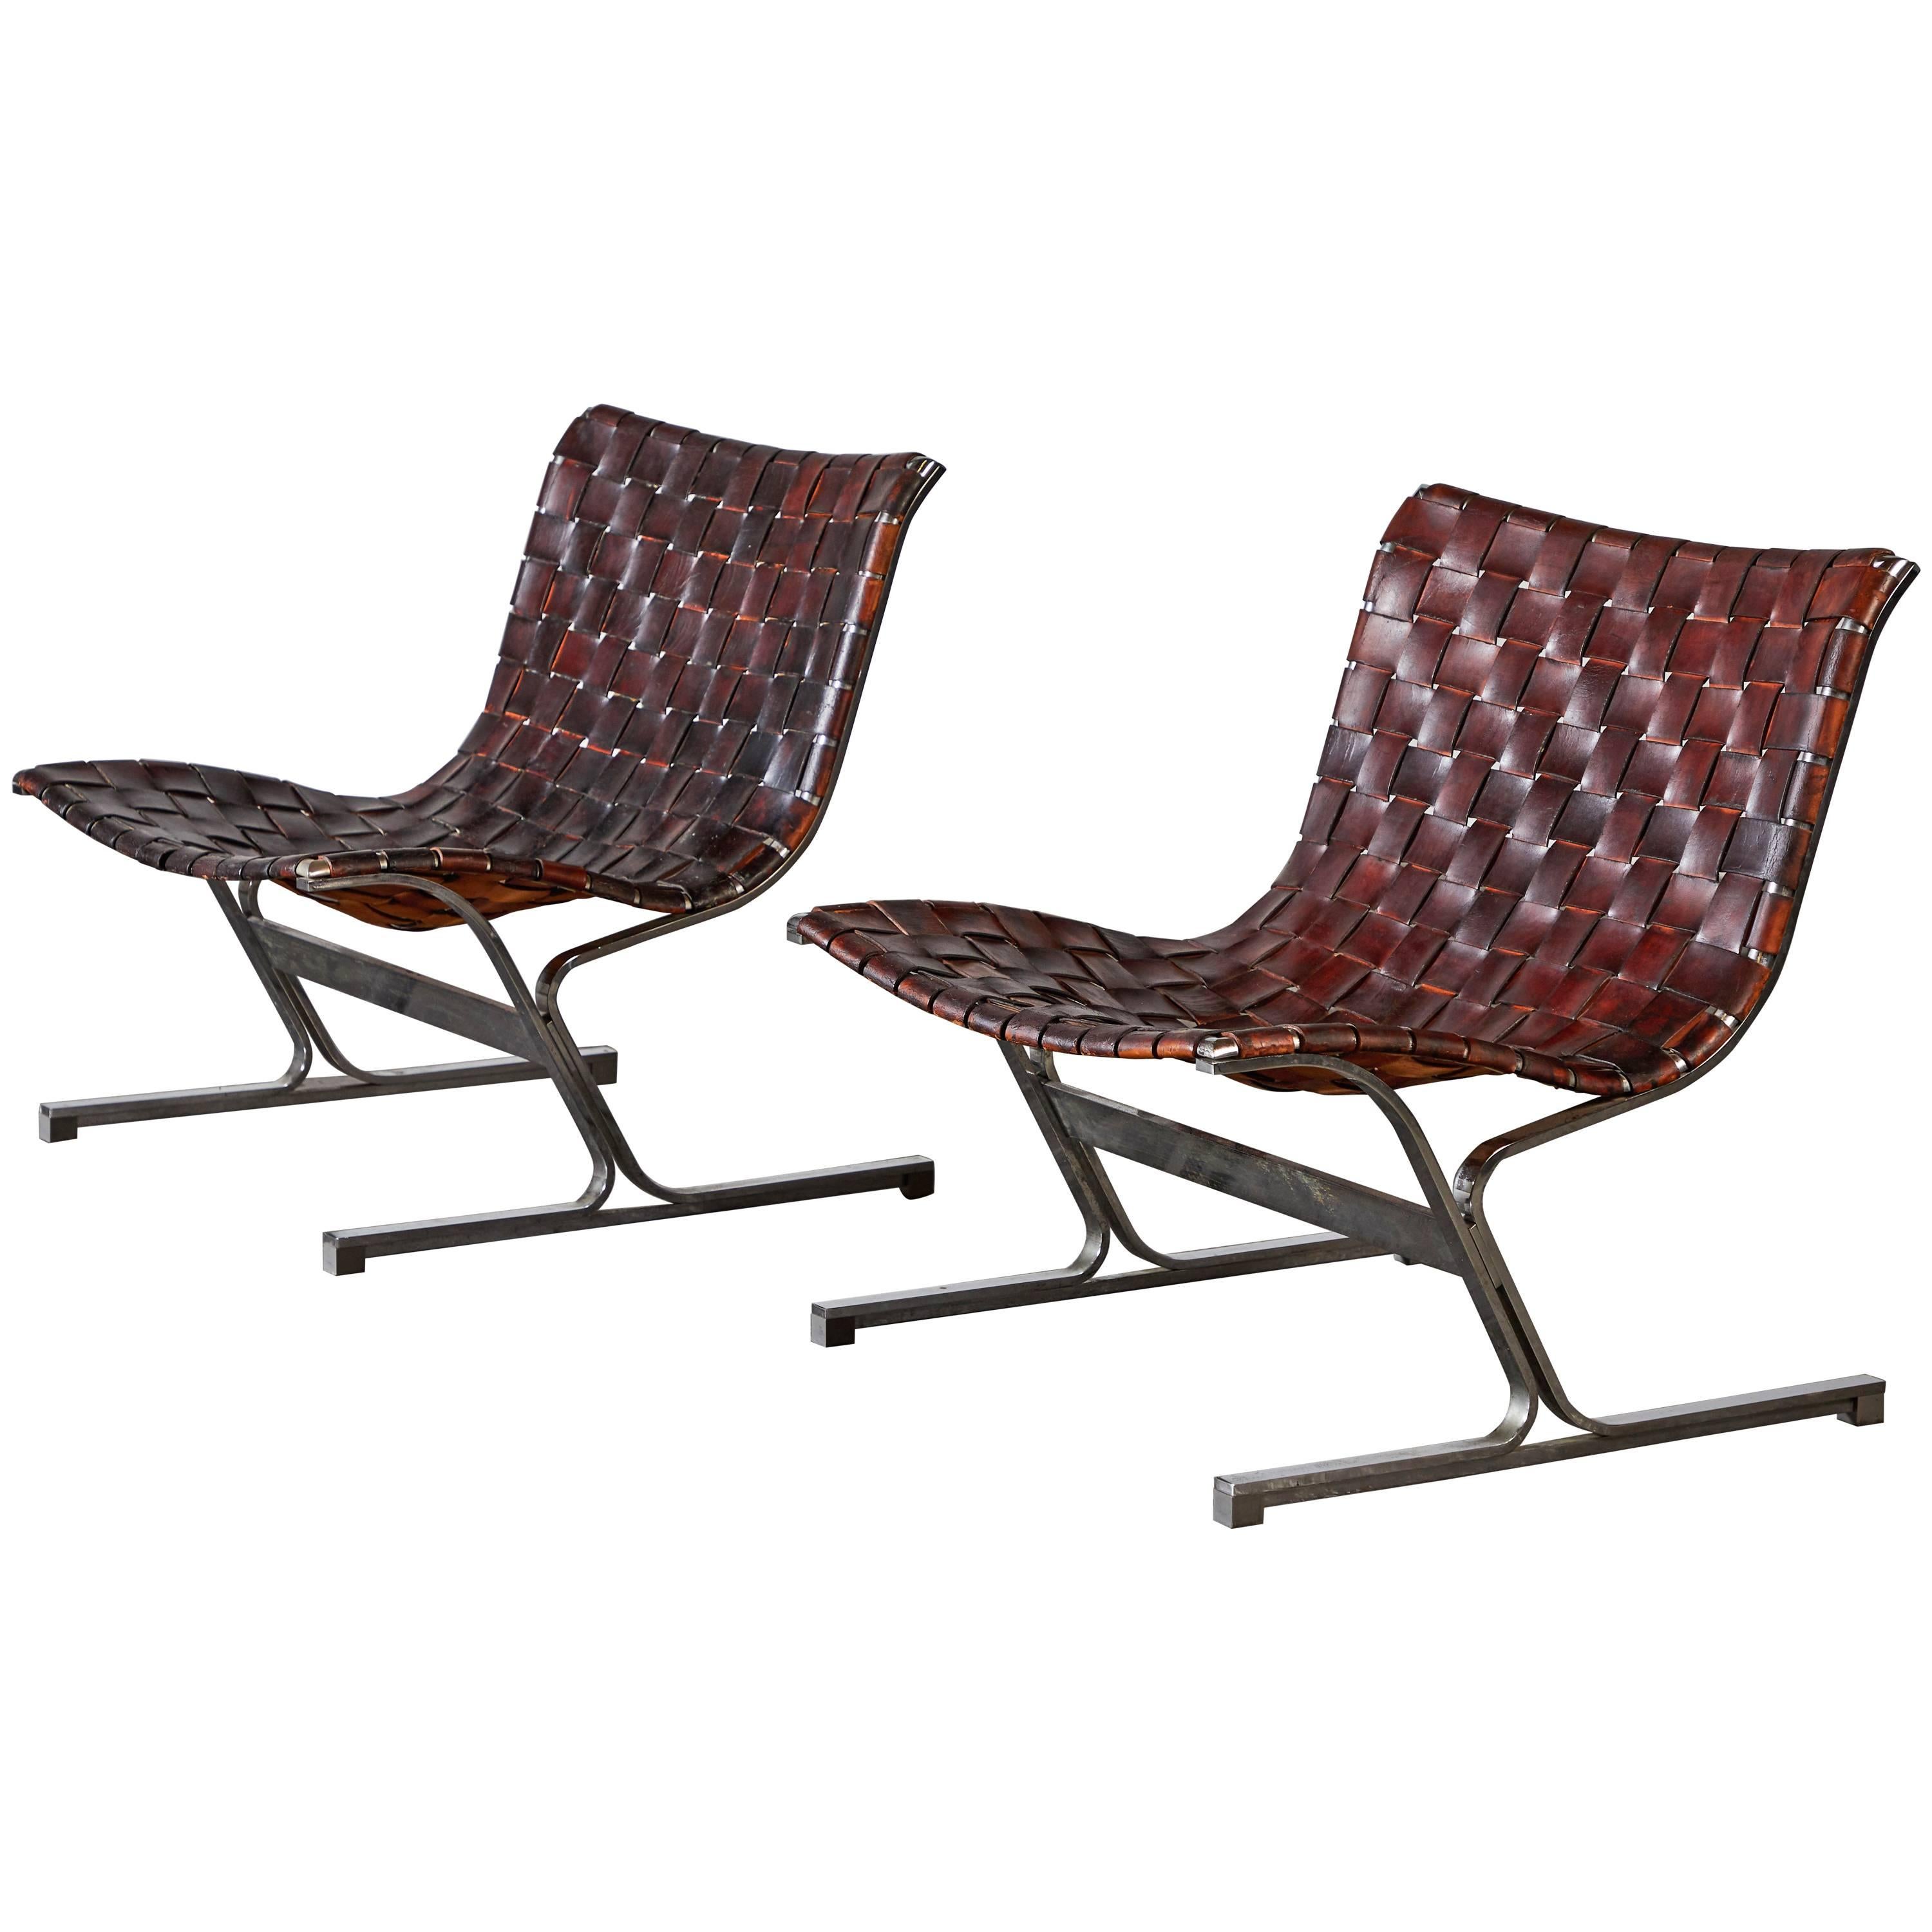 Patinated Leather Lounge Chairs by Ross Littell